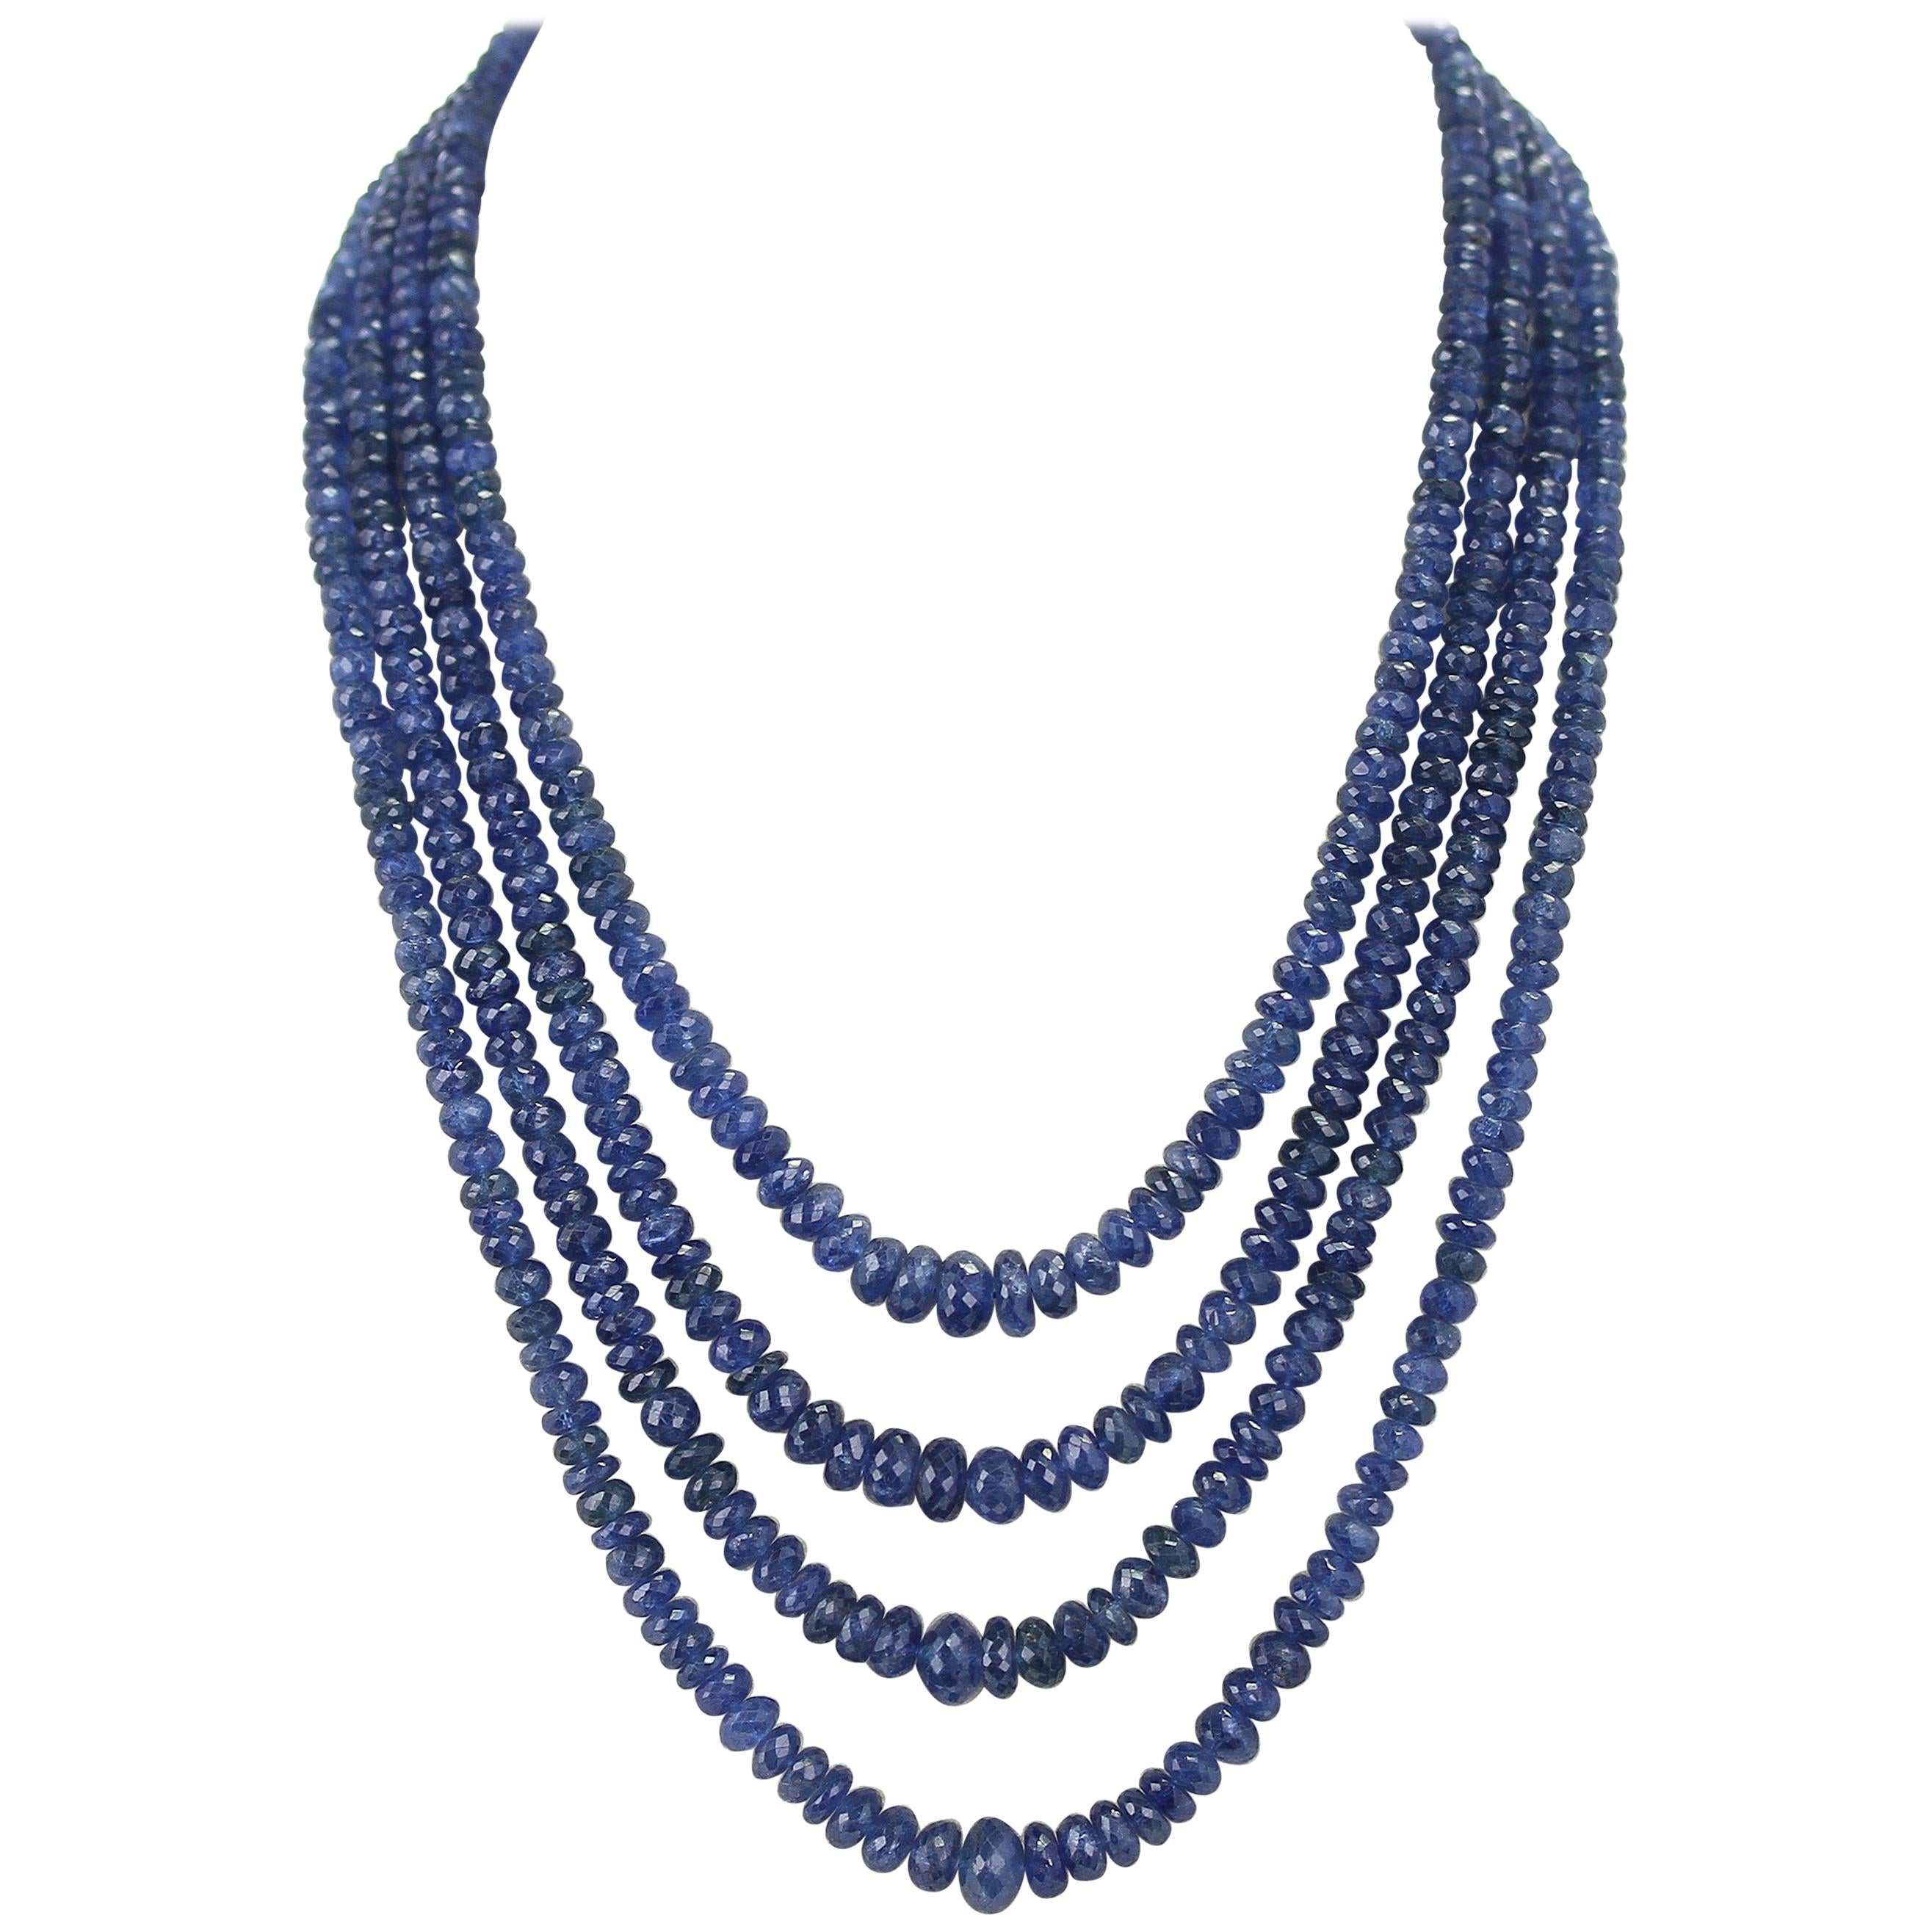 Natural 3 Rows Faceted 5x8mm Blue Sapphire Gems Beads Necklace 17-19'' AAA